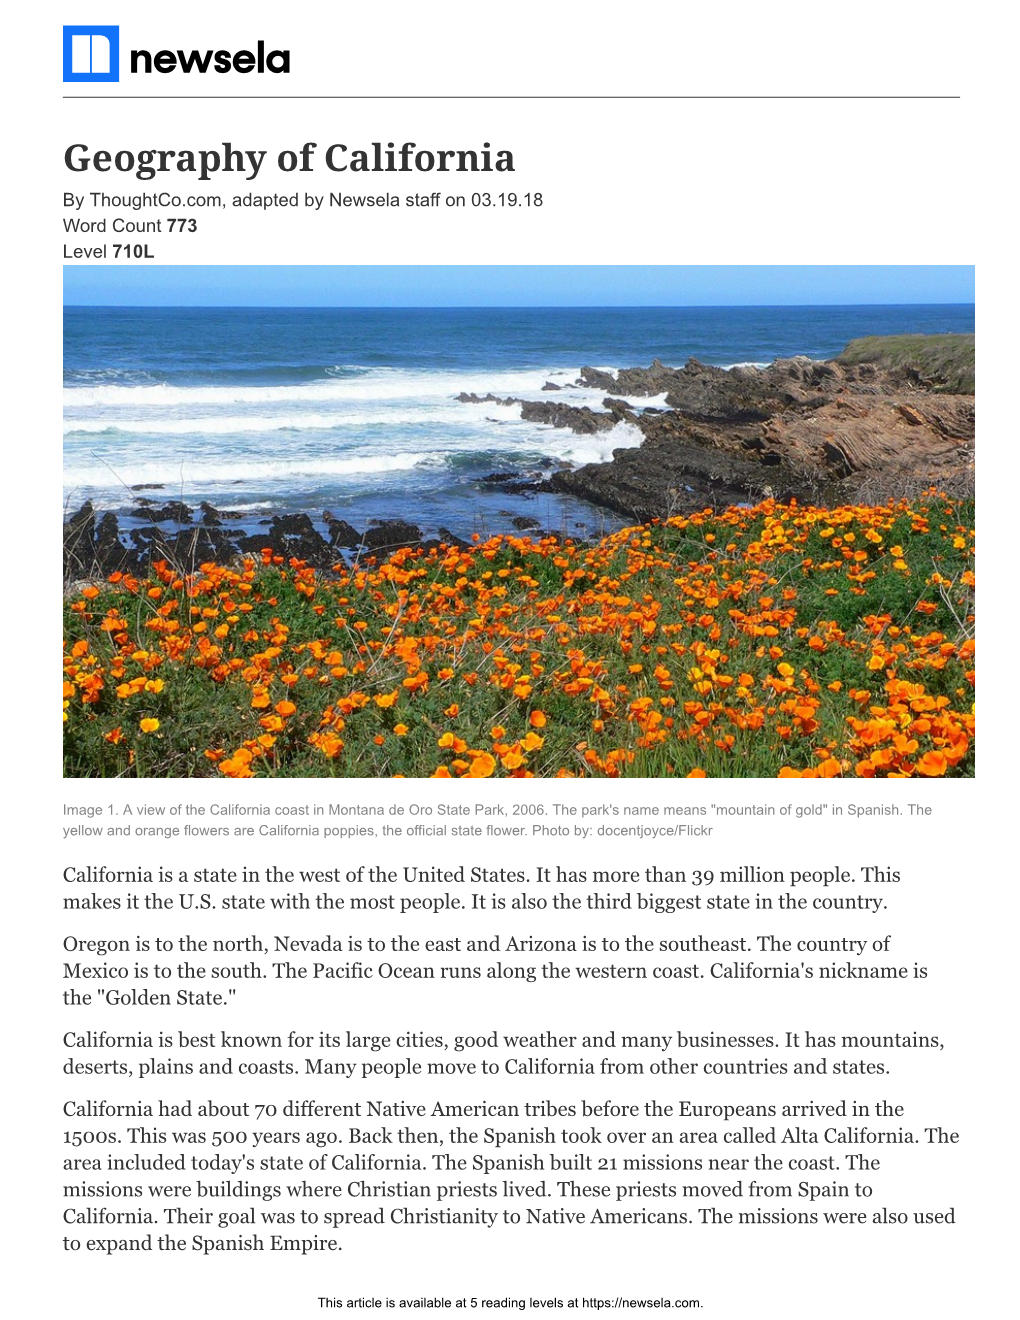 Geography of California by Thoughtco.Com, Adapted by Newsela Staff on 03.19.18 Word Count 773 Level 710L